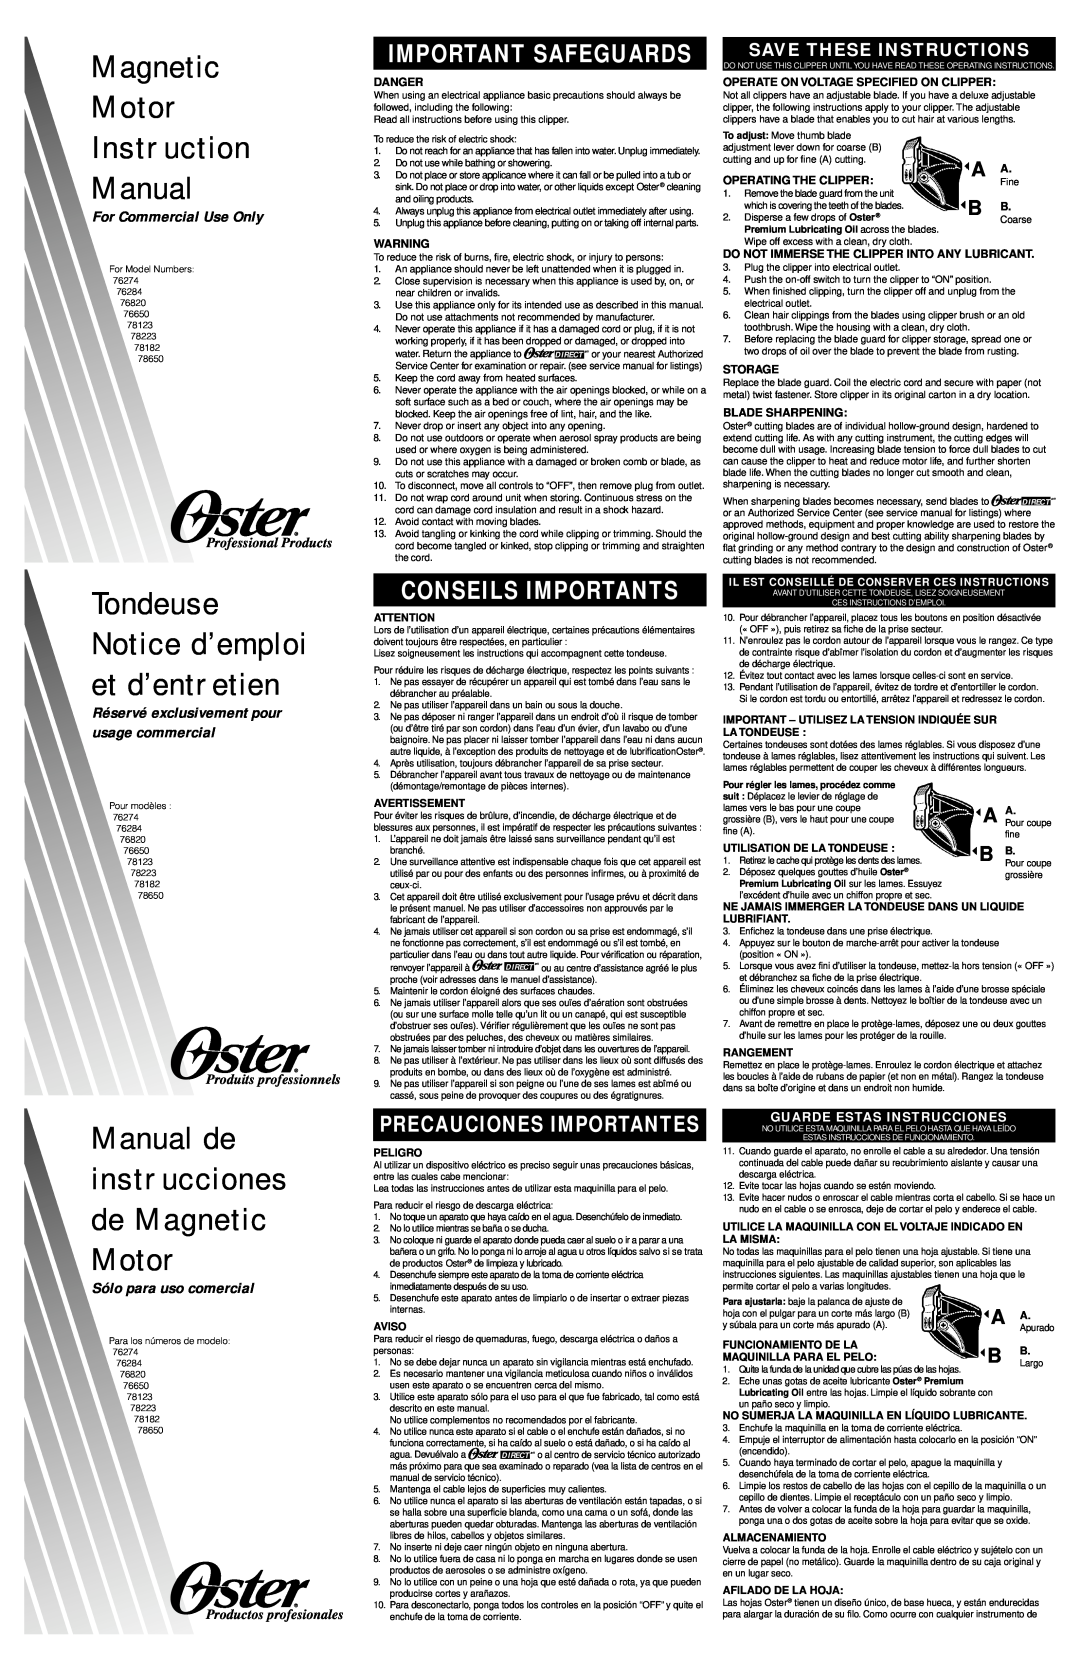 Oster 78182, 78123, 78650, 78223 instruction manual Professional Products, Produits professionnels, Productos profesionales 